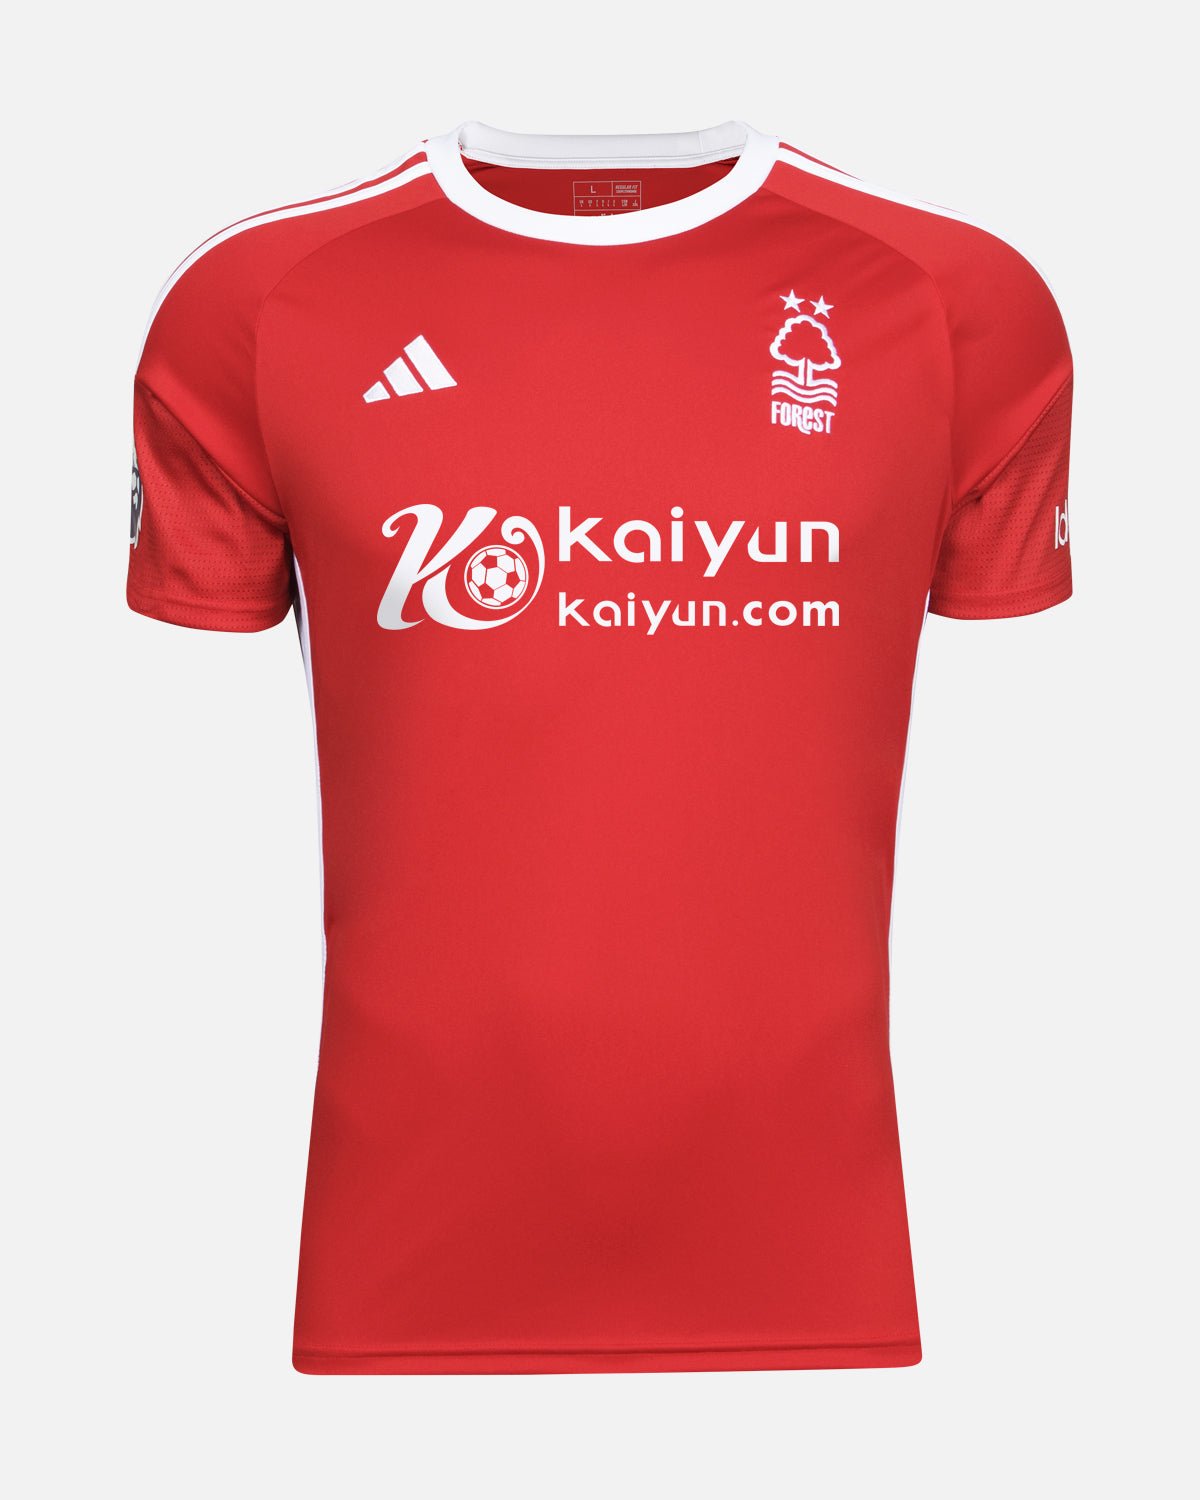 NFFC Home Shirt 23-24 - Nuno 3 - Nottingham Forest FC